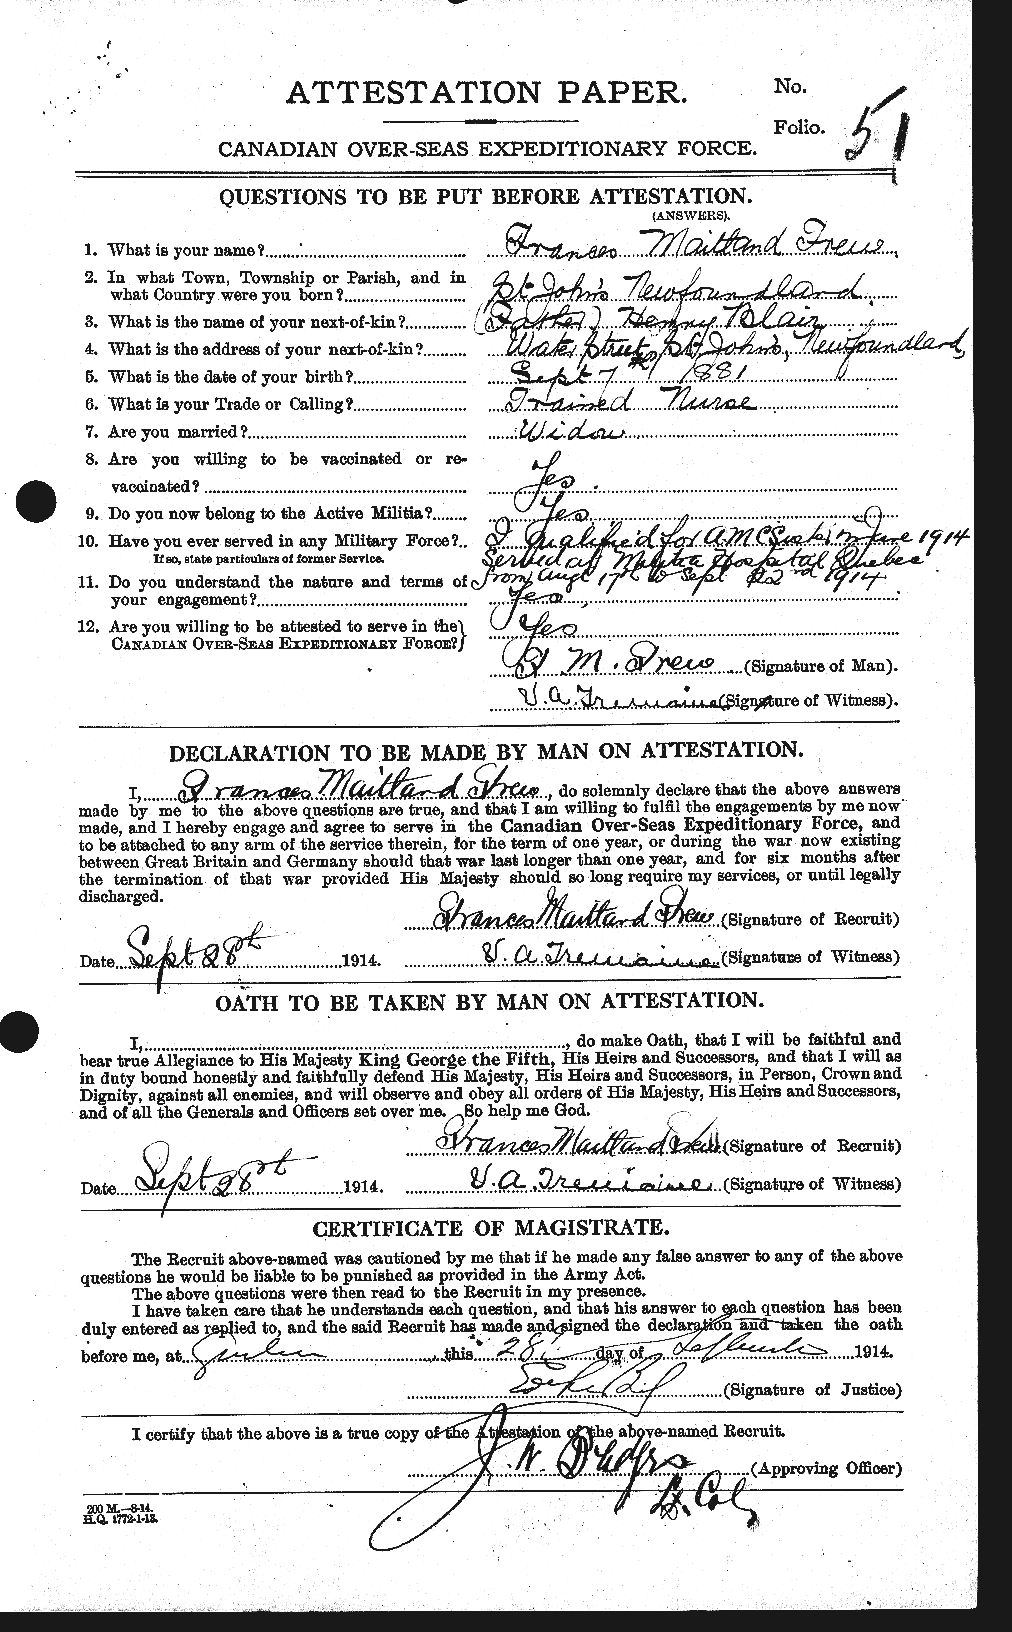 Personnel Records of the First World War - CEF 336138a